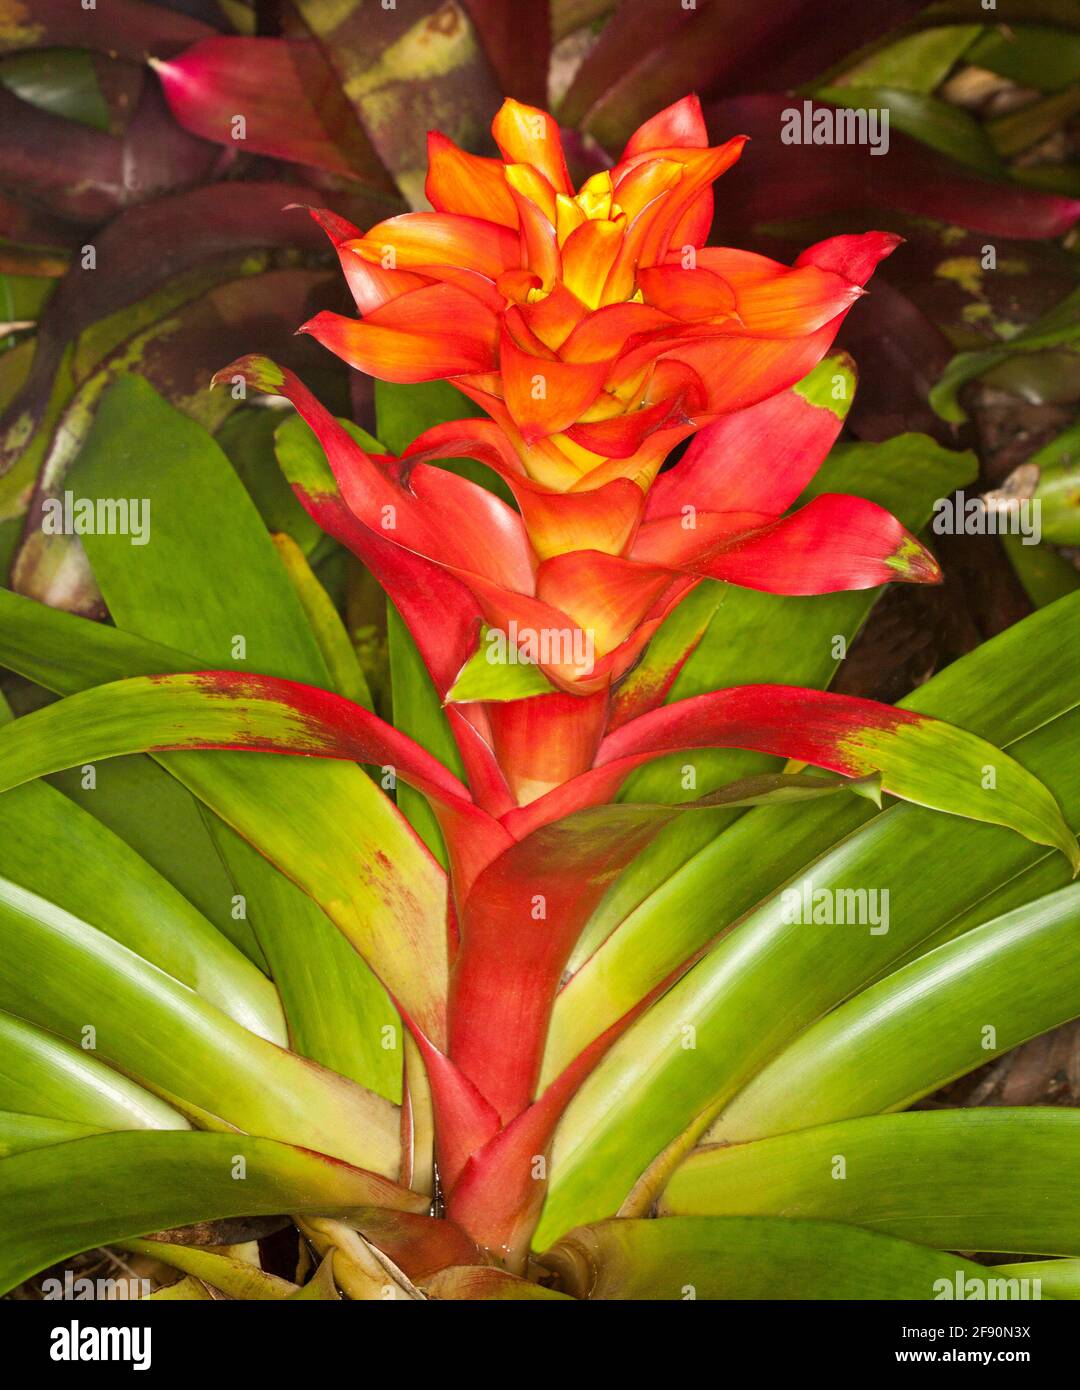 Unusual vivid red / orange flower bract of a Bromeliad , a Guzmania cultivar, against background on bright green leaves Stock Photo